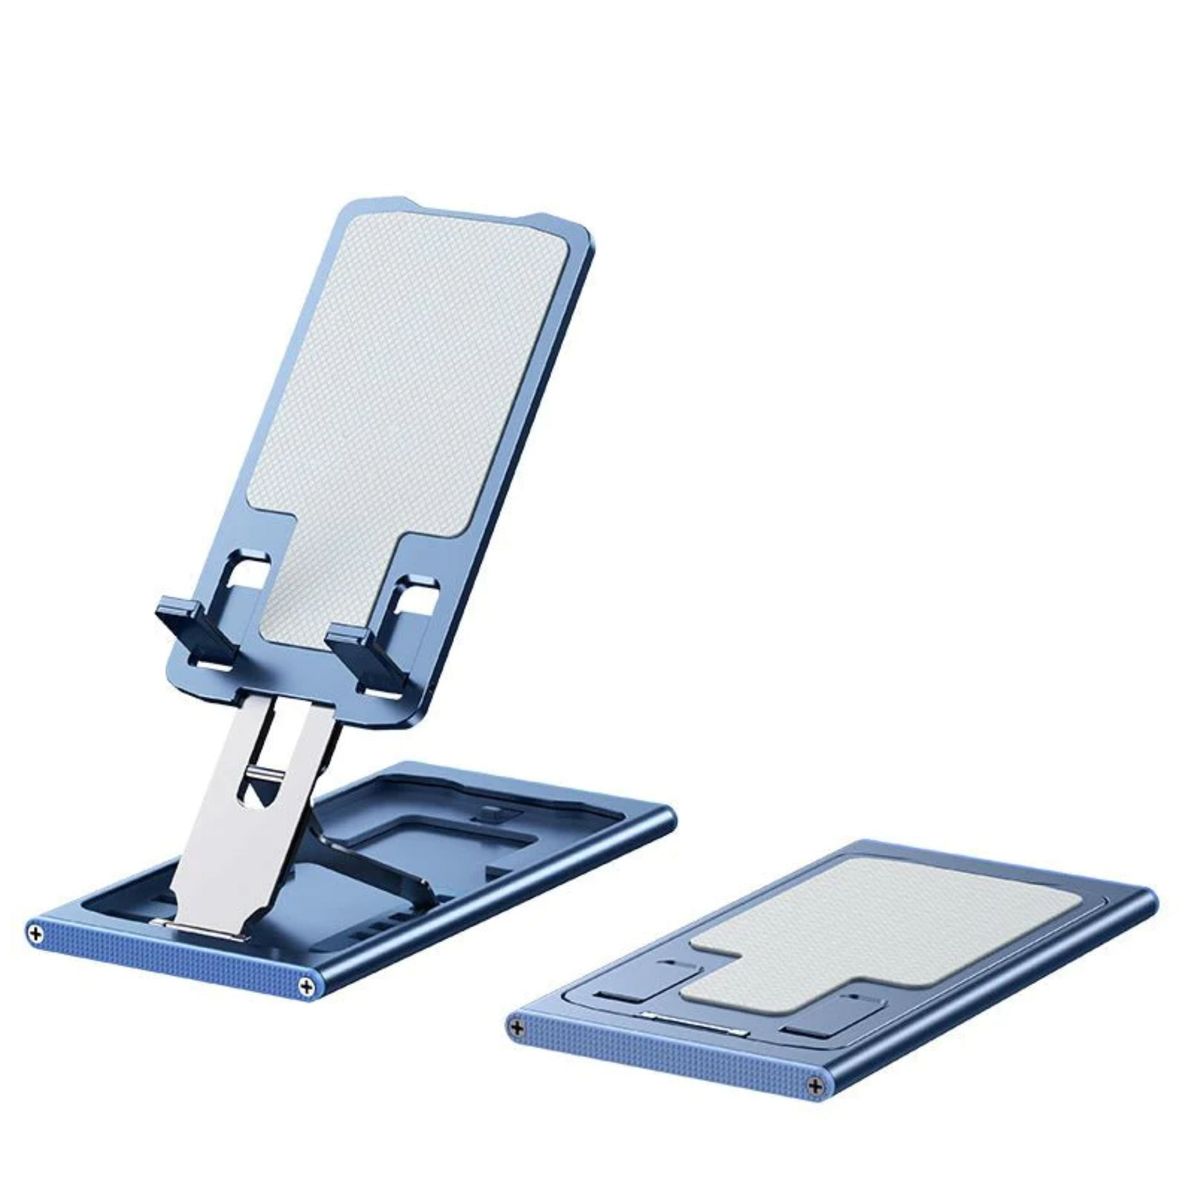 Photos - Holder / Stand Multitasky Slim & Compact Foldable Phone Holder by Multitasky™, MT-T-037 